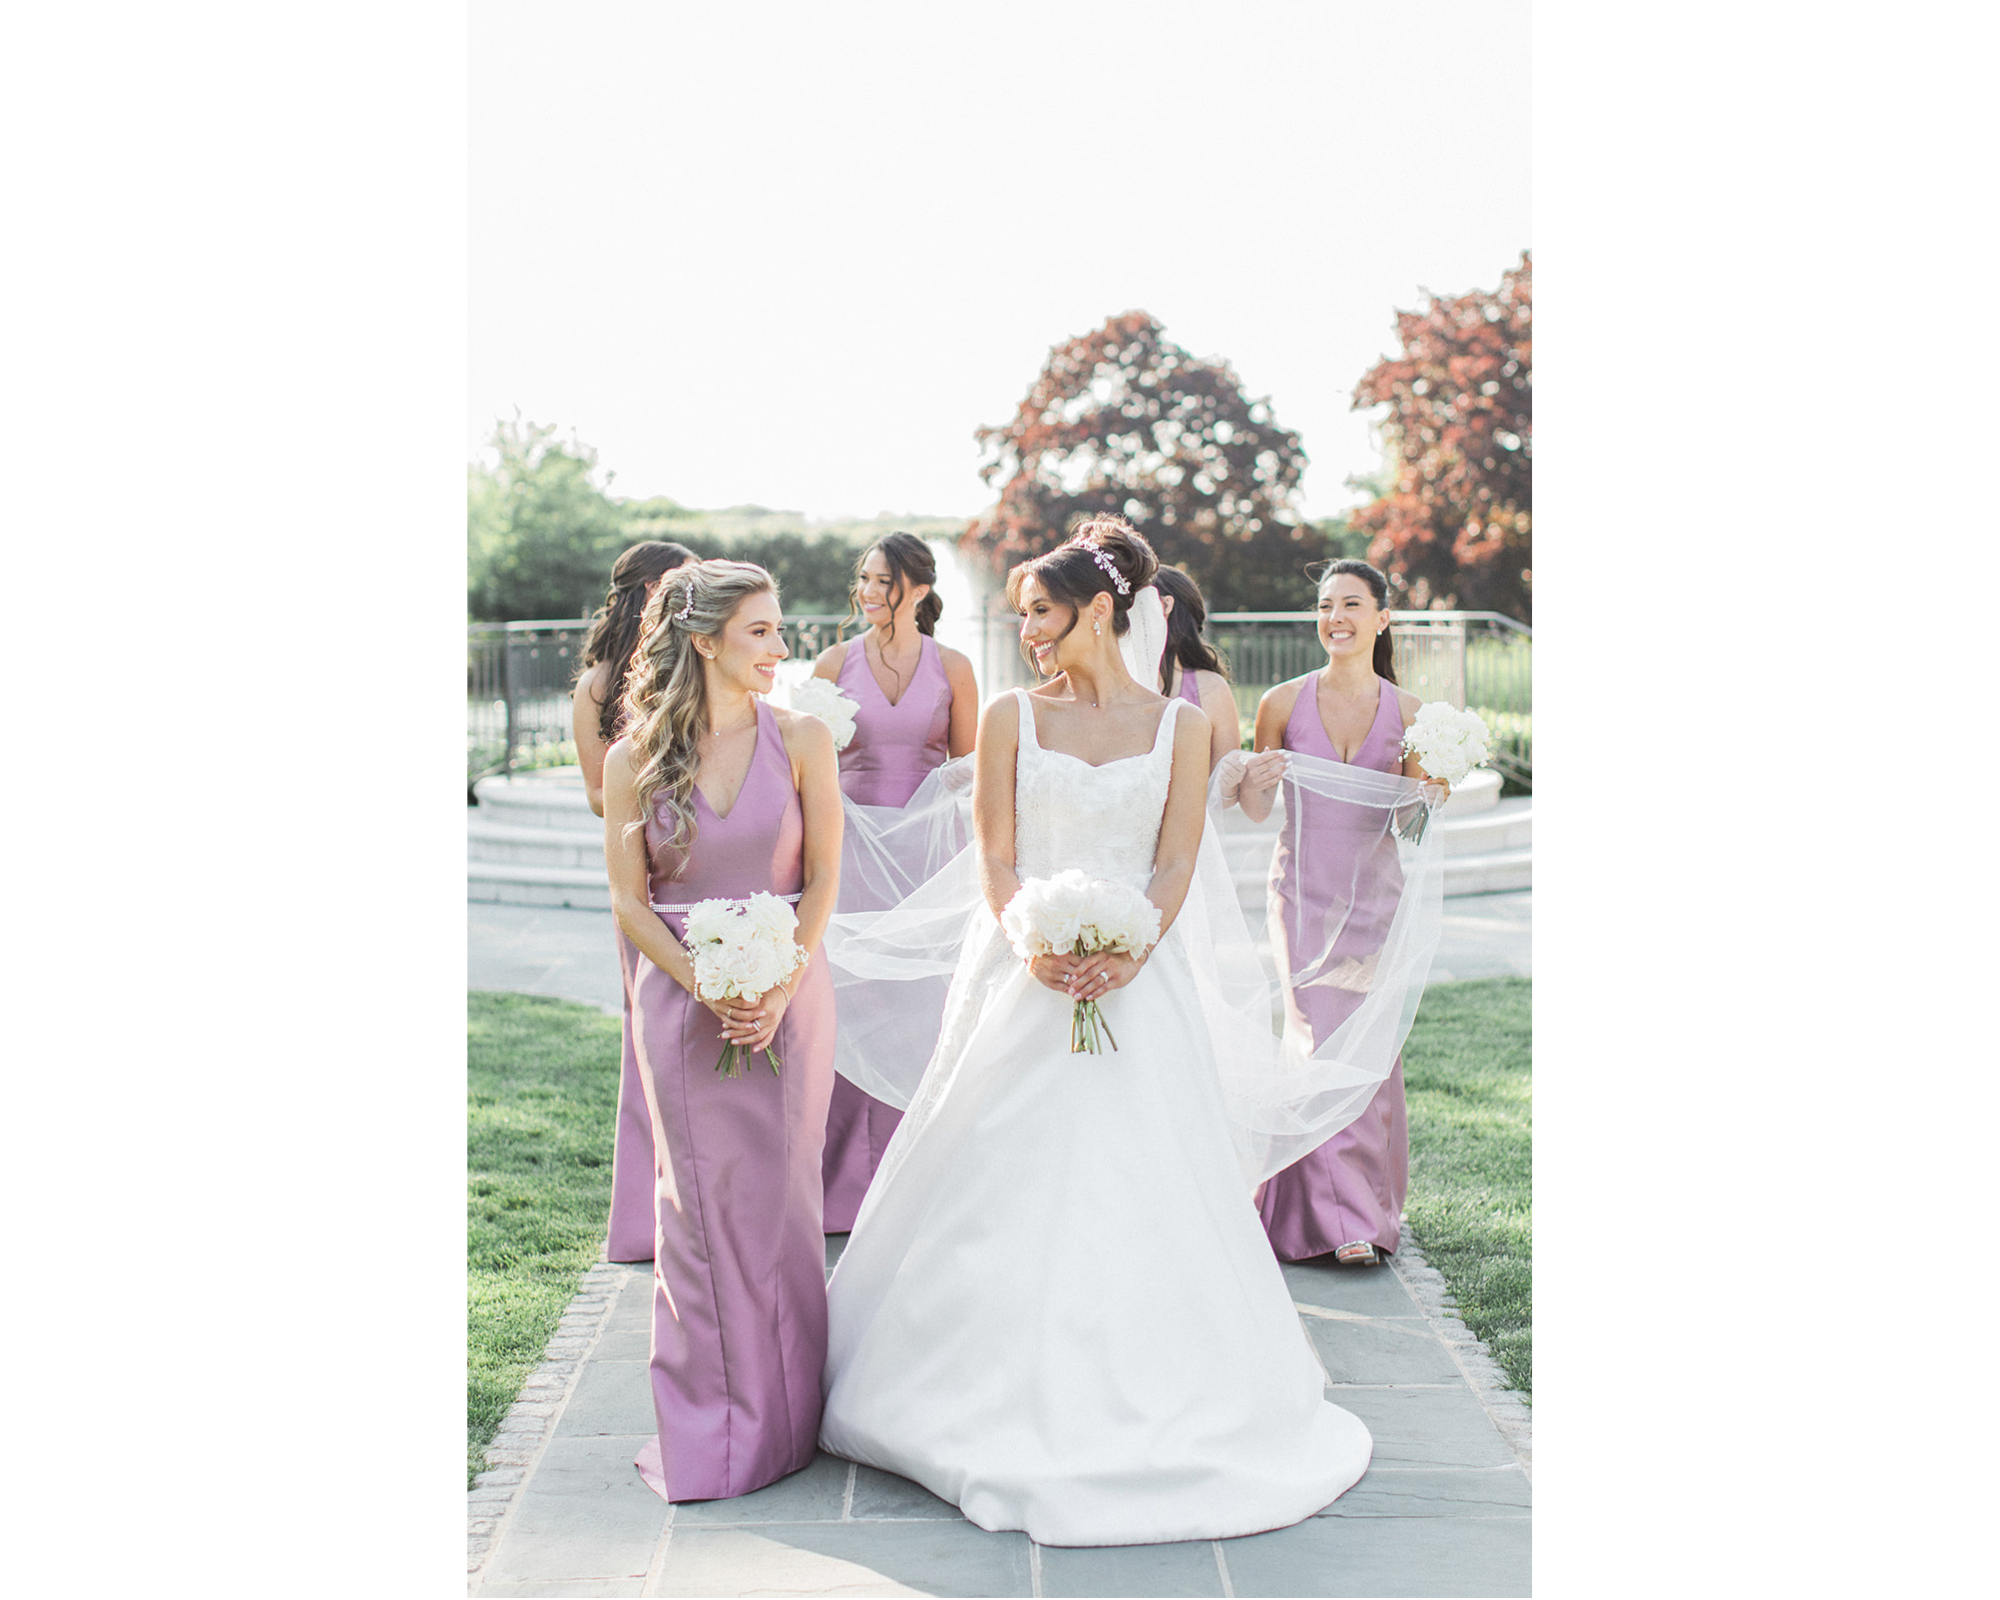 Kara walking outdoors with her bridesmaids, who are wearing lovely orchid dresses. The bride is wearing her Anne Barge gown, a bridal headpiece with Swarovski crystals, freshwater pearls, and porcelain flowers. She's also wearing a crystal-edged veil, and pearl and crystal earrings.